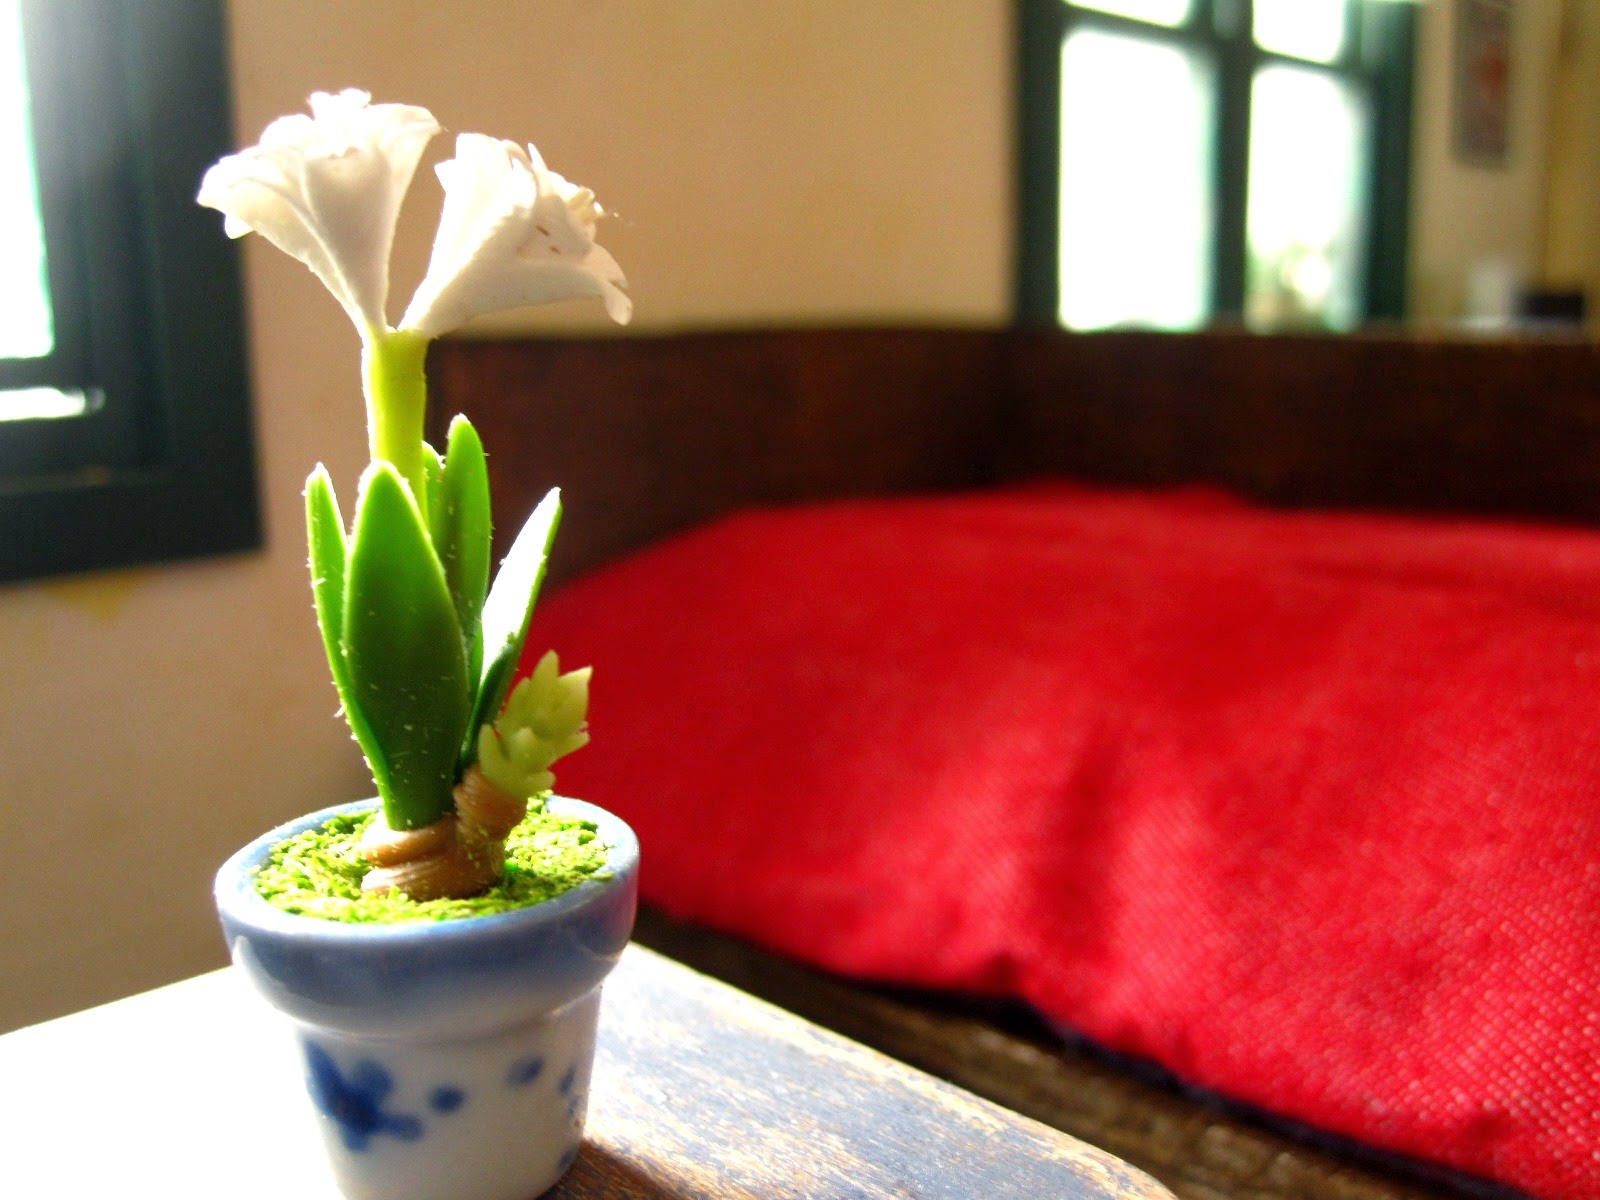 Dolls house miniature Amarylis plant in a pot on a coffee table.